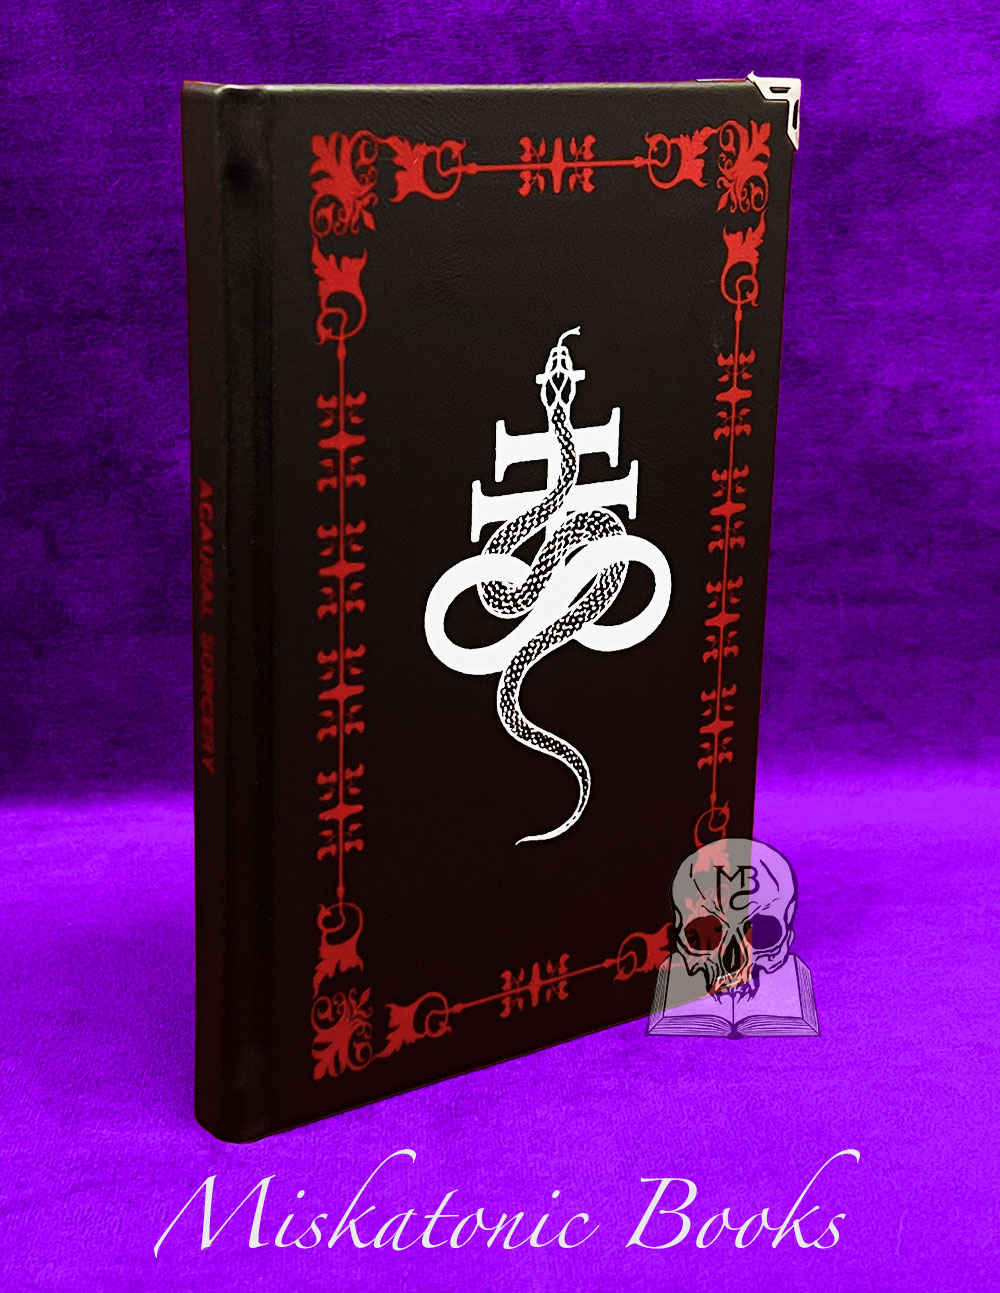 ACAUSAL SORCERY The Black Flame and Sinister Alchemy by Typhon Draconis - DELUXE Leather Bound Limited Edition with Altar Cloth